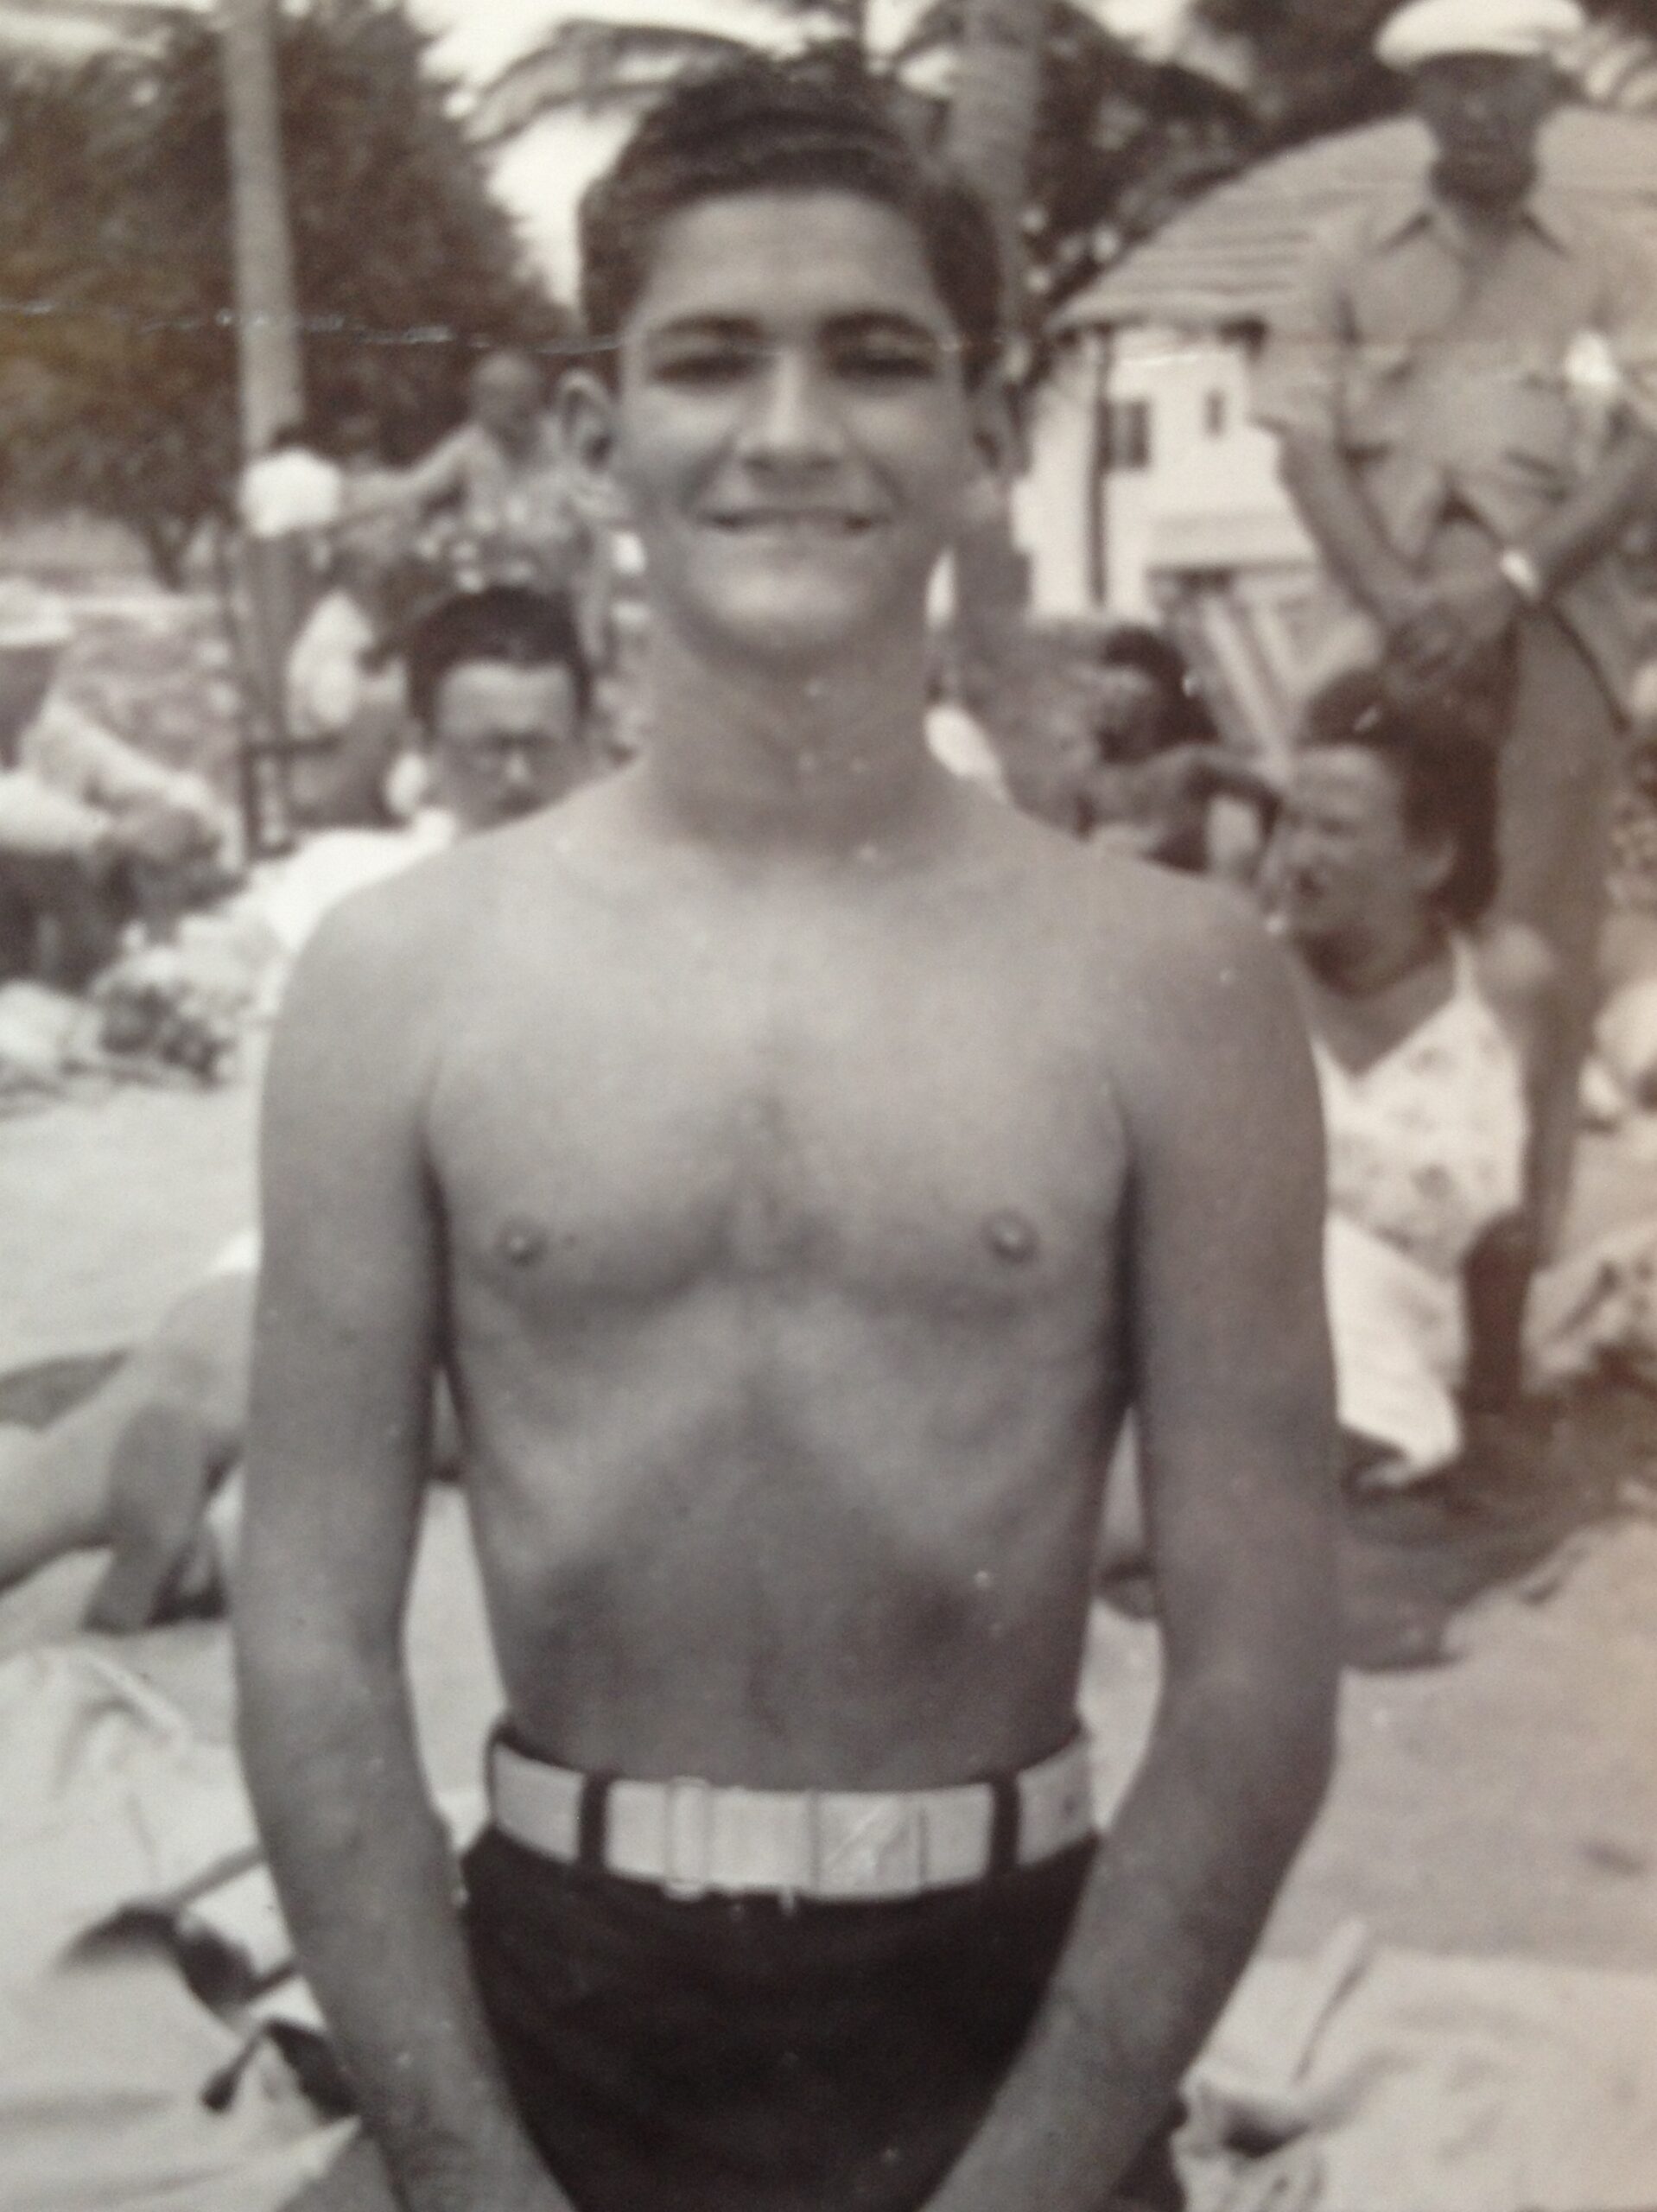 Black and white photo of a young teenager, Manny Zaiac, standing on the beach in 1948.